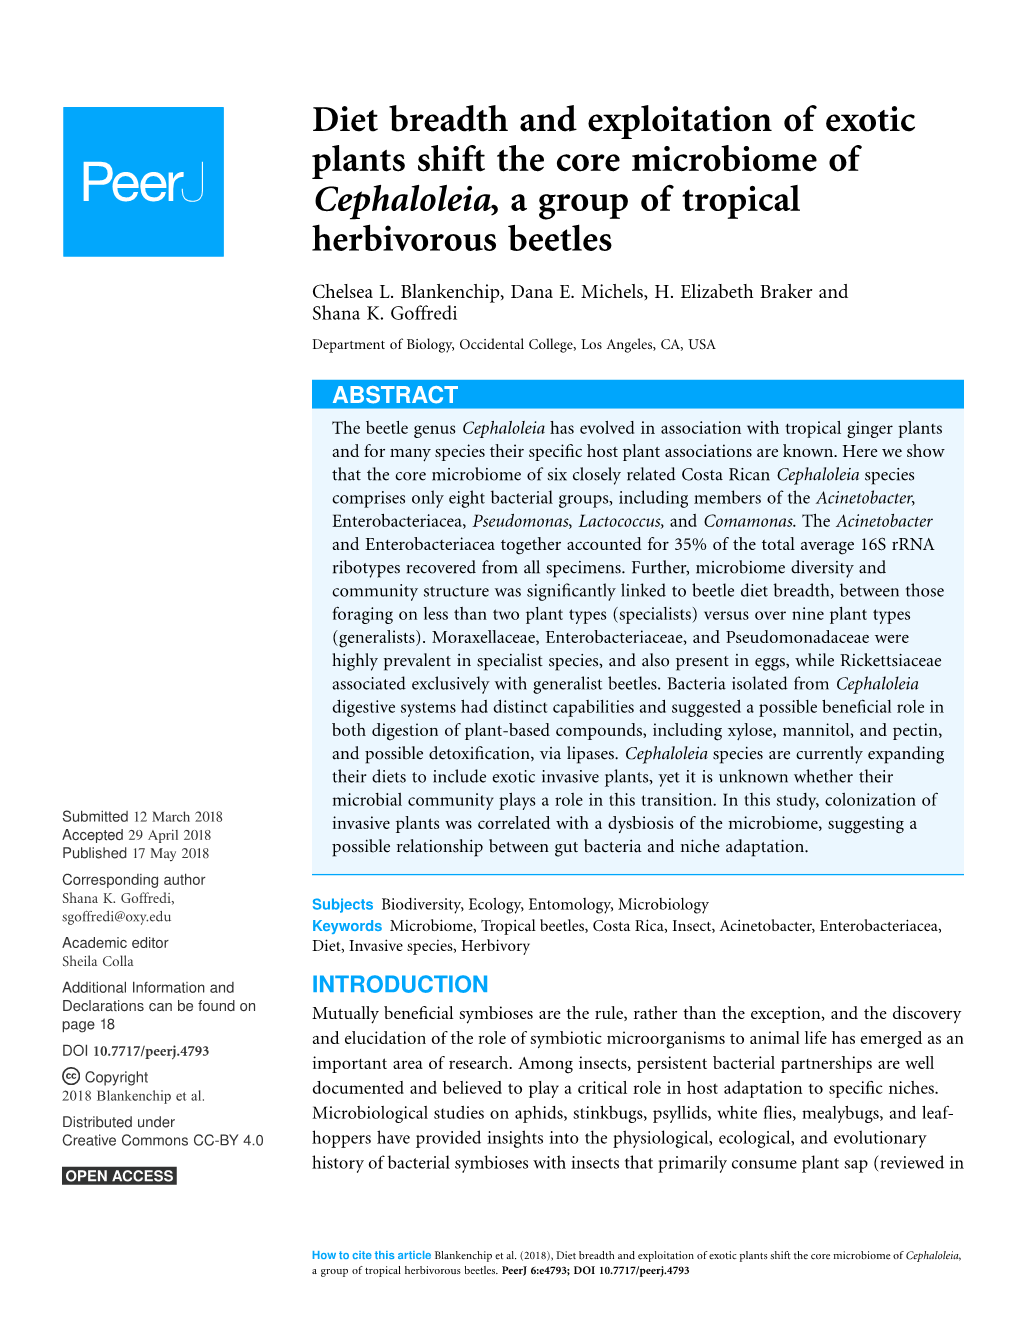 Diet Breadth and Exploitation of Exotic Plants Shift the Core Microbiome of Cephaloleia, a Group of Tropical Herbivorous Beetles